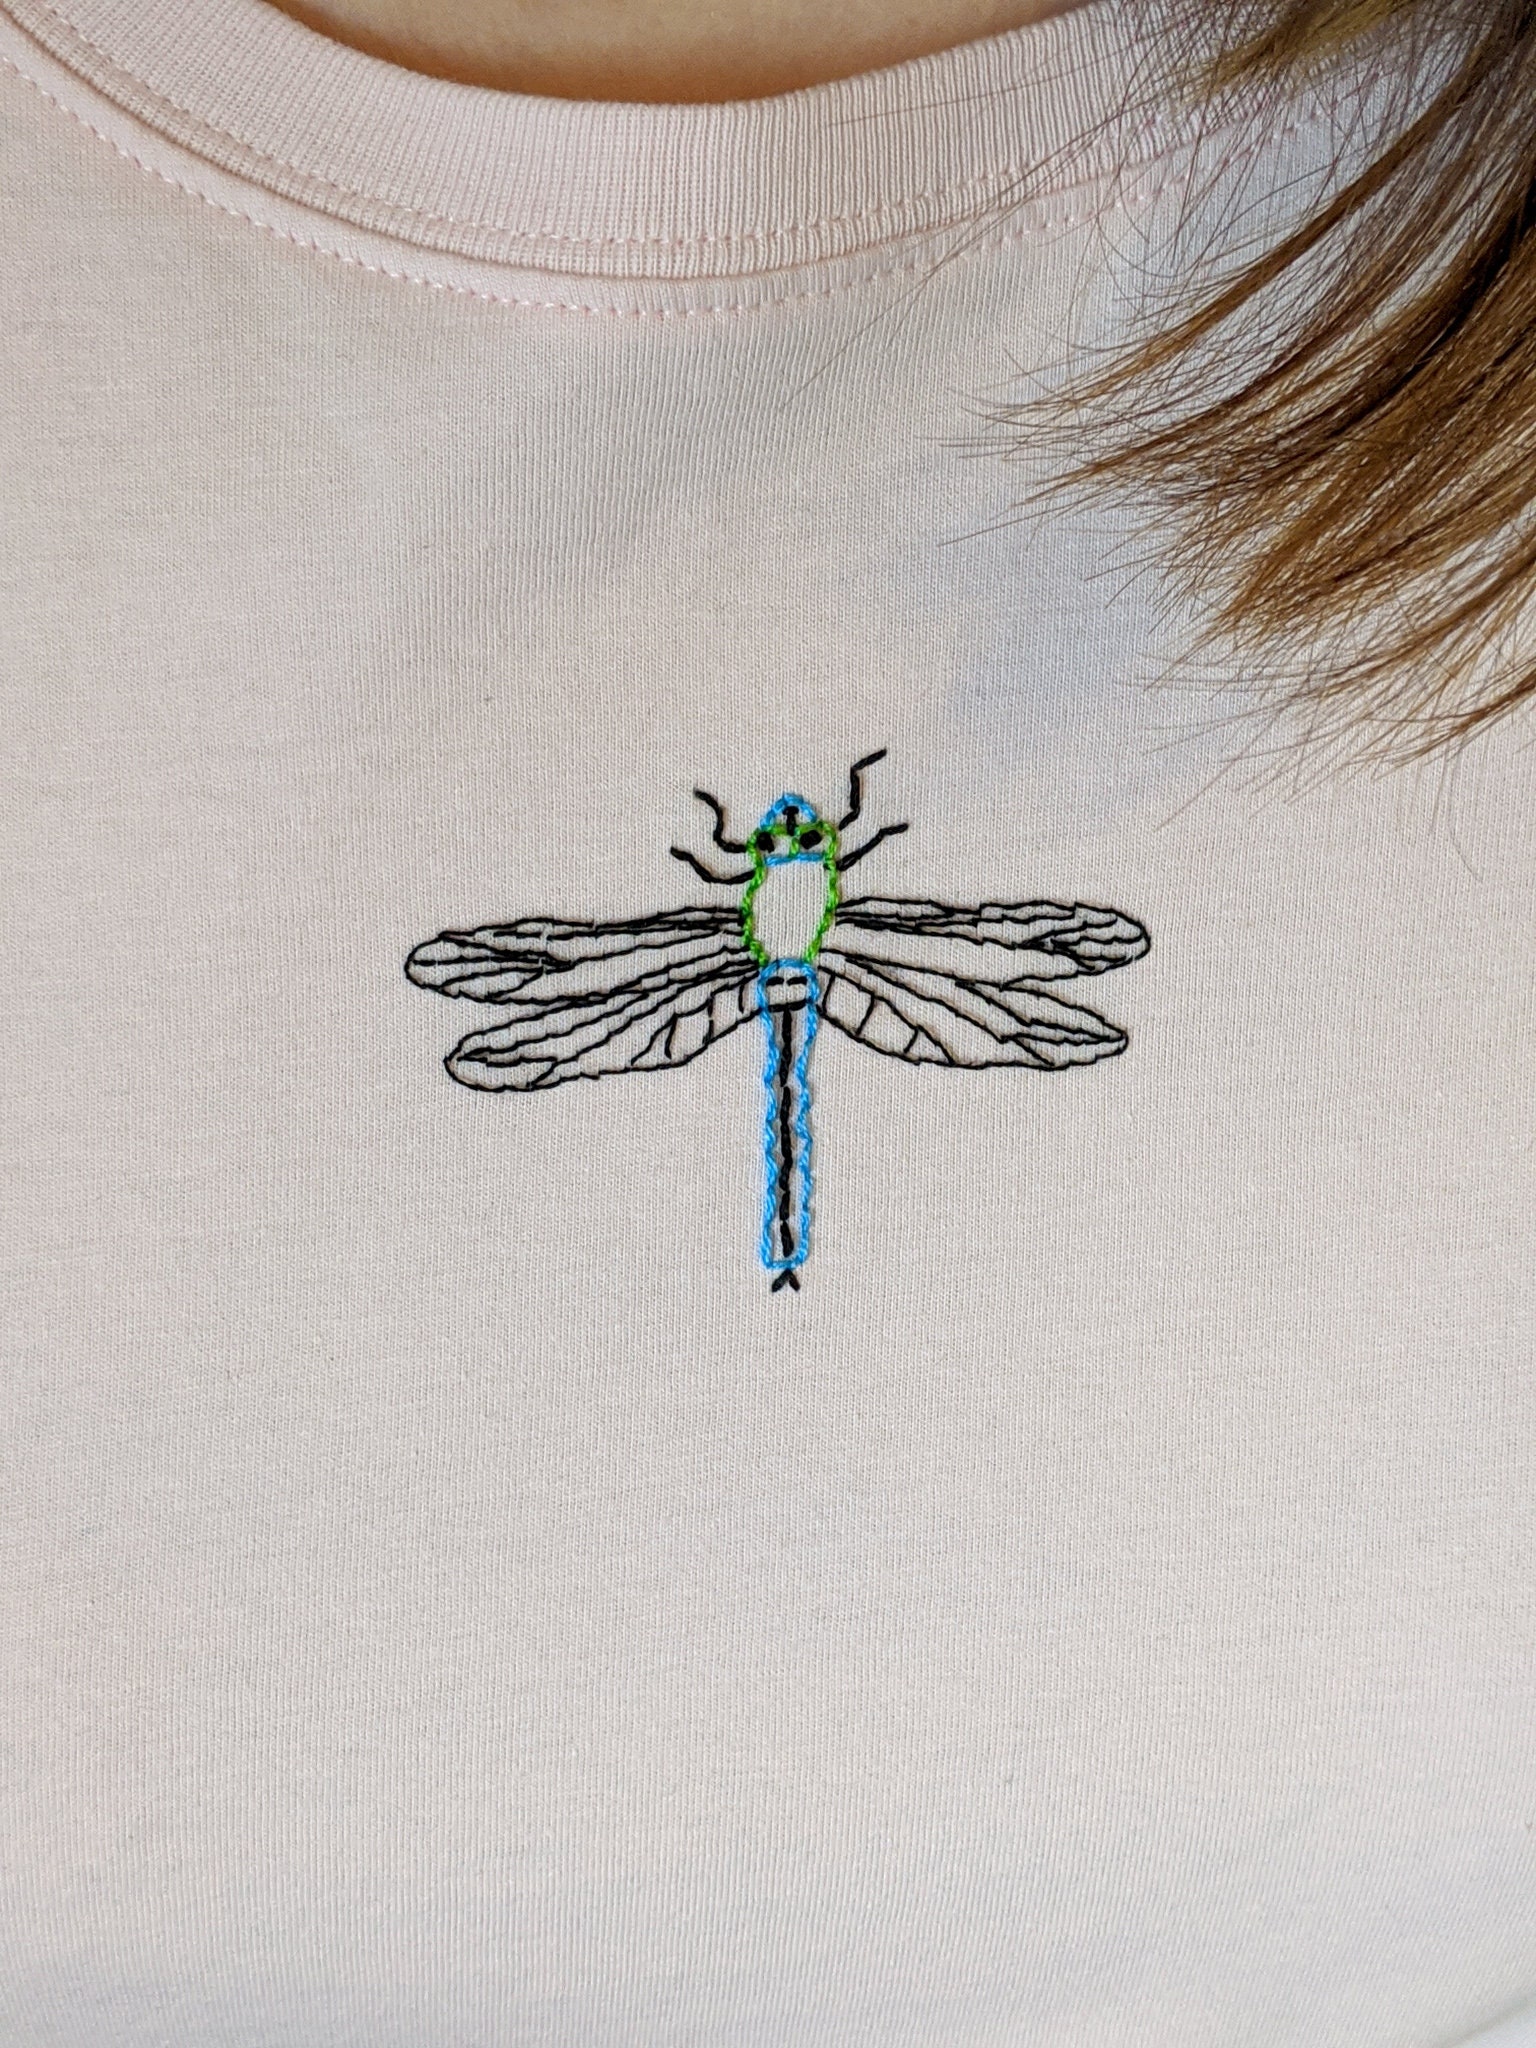 Hand embroidered dragonfly t-shirt organic cotton top unique | Etsy